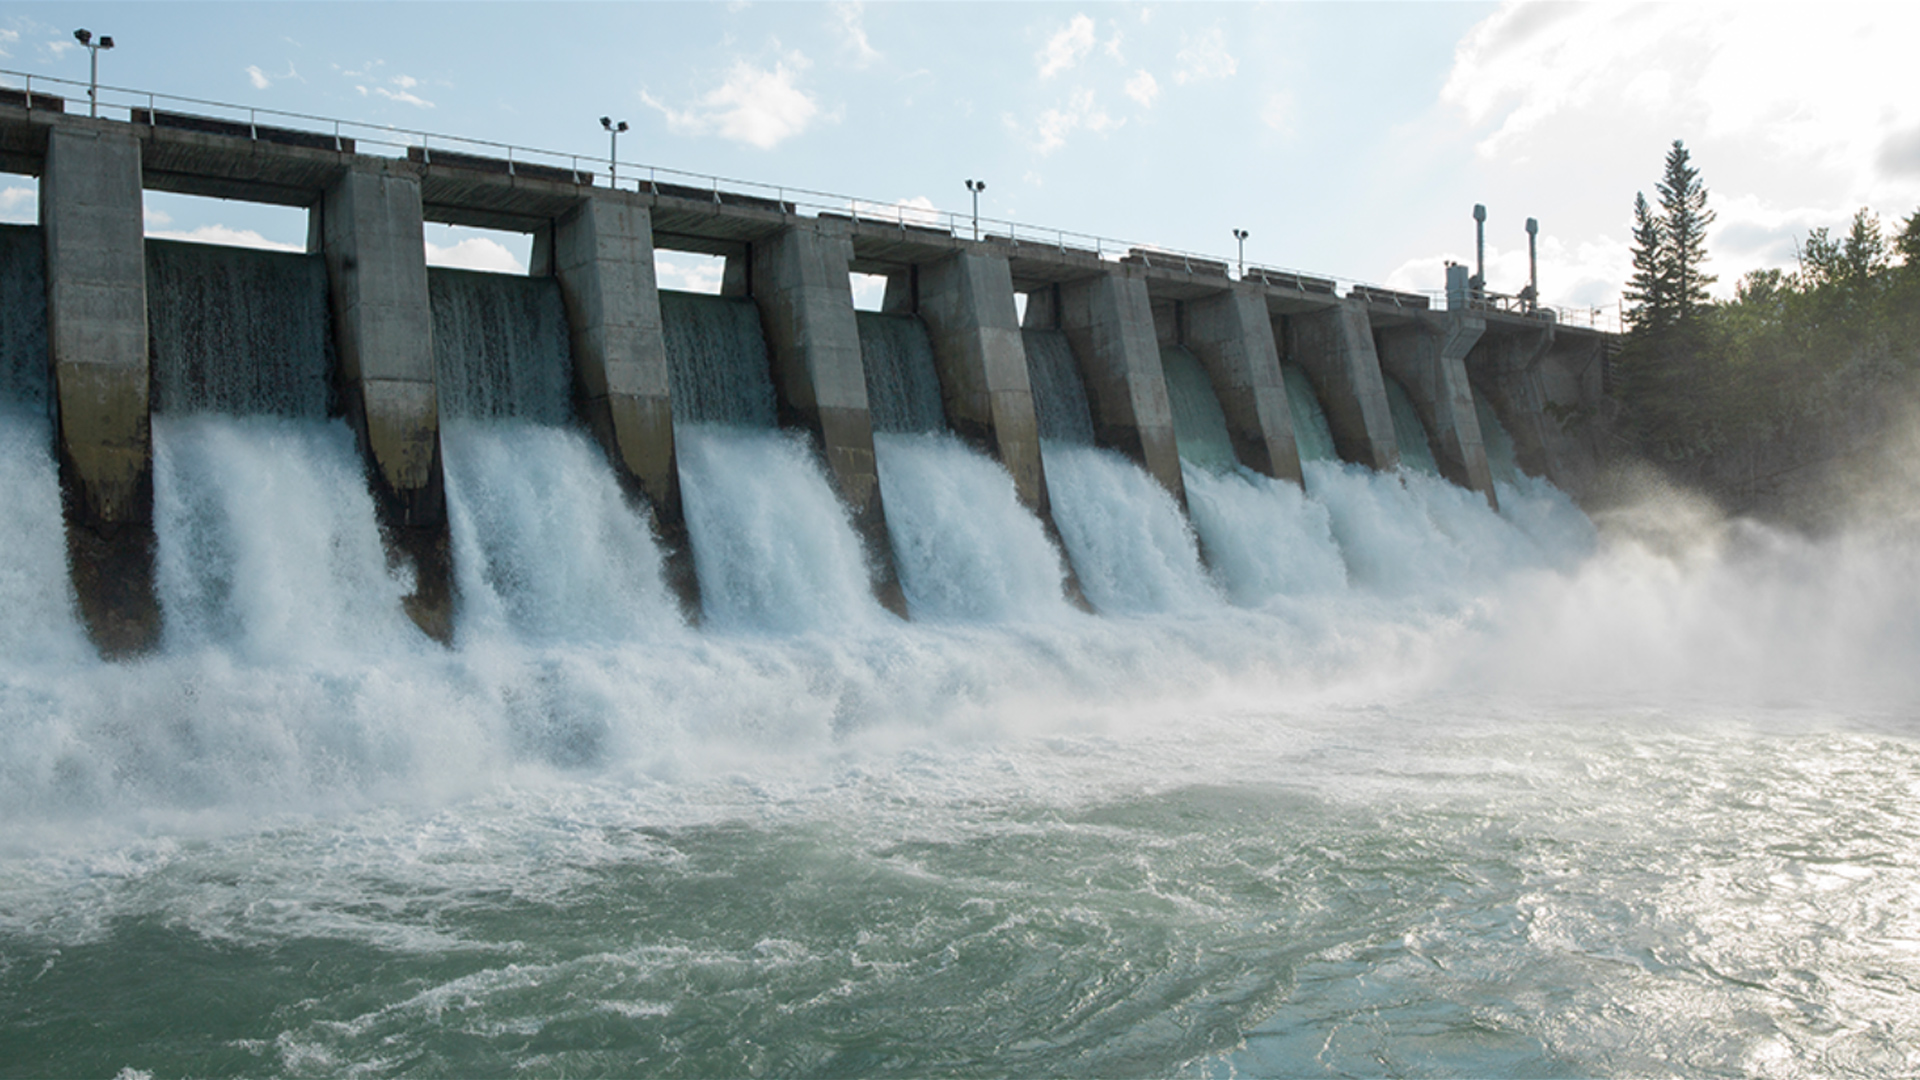 Water moving in dams generating hydropower